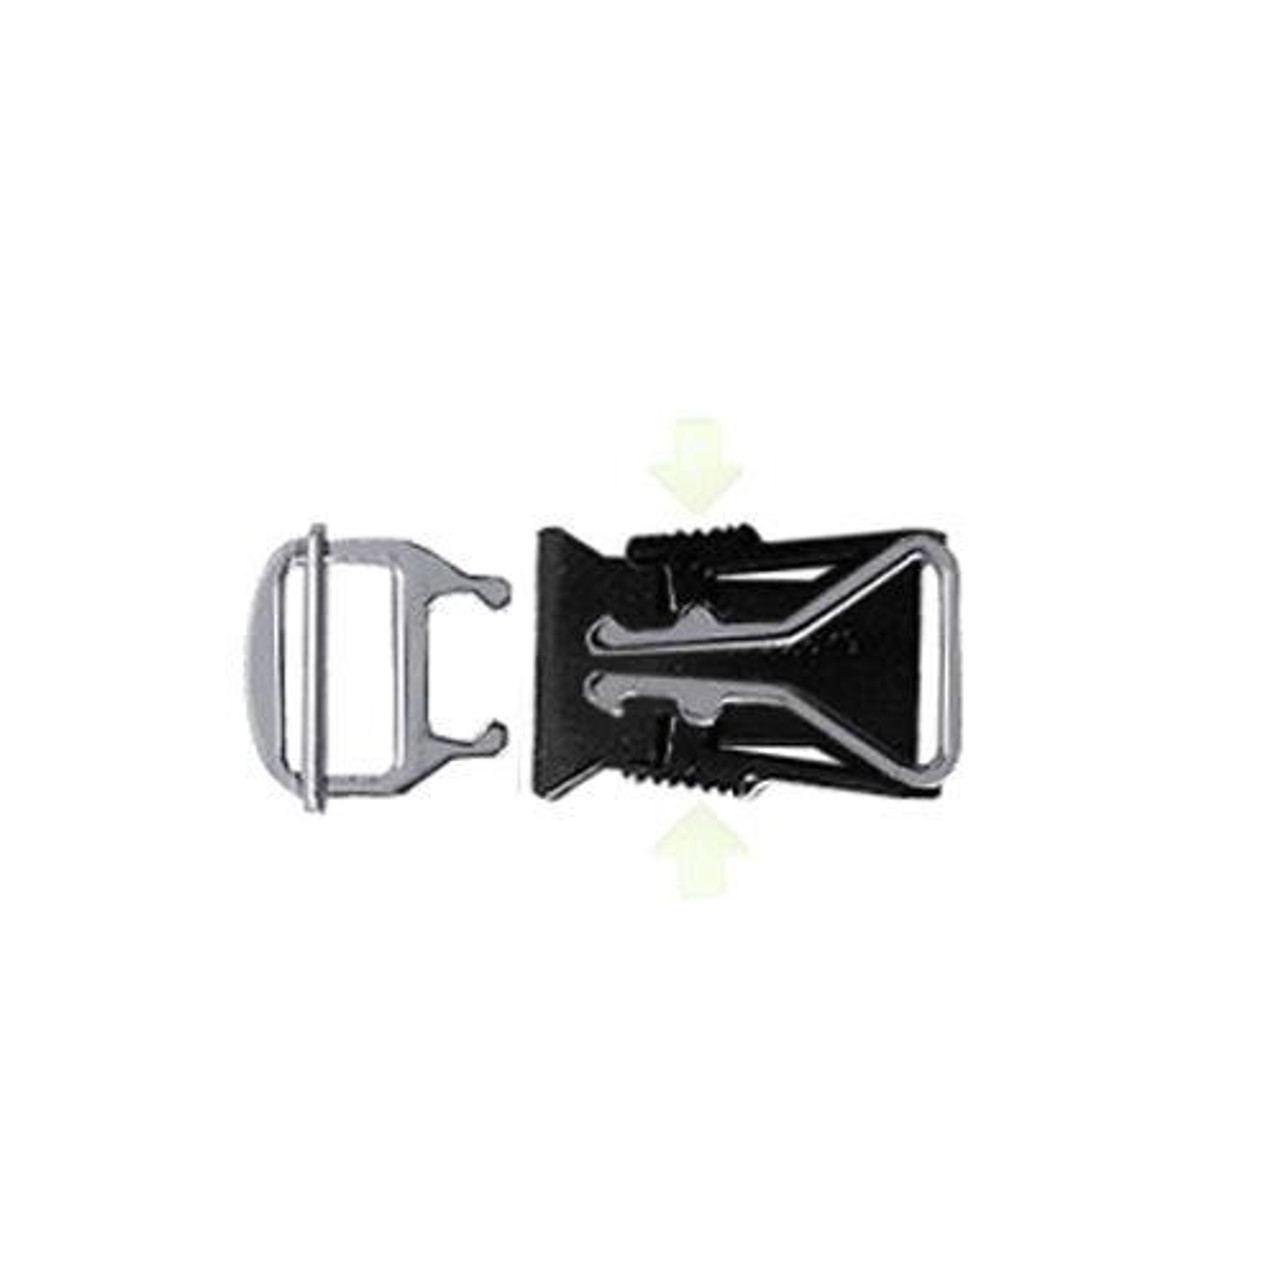 HOOK 20 Helmet Buckle • A+ Products Inc